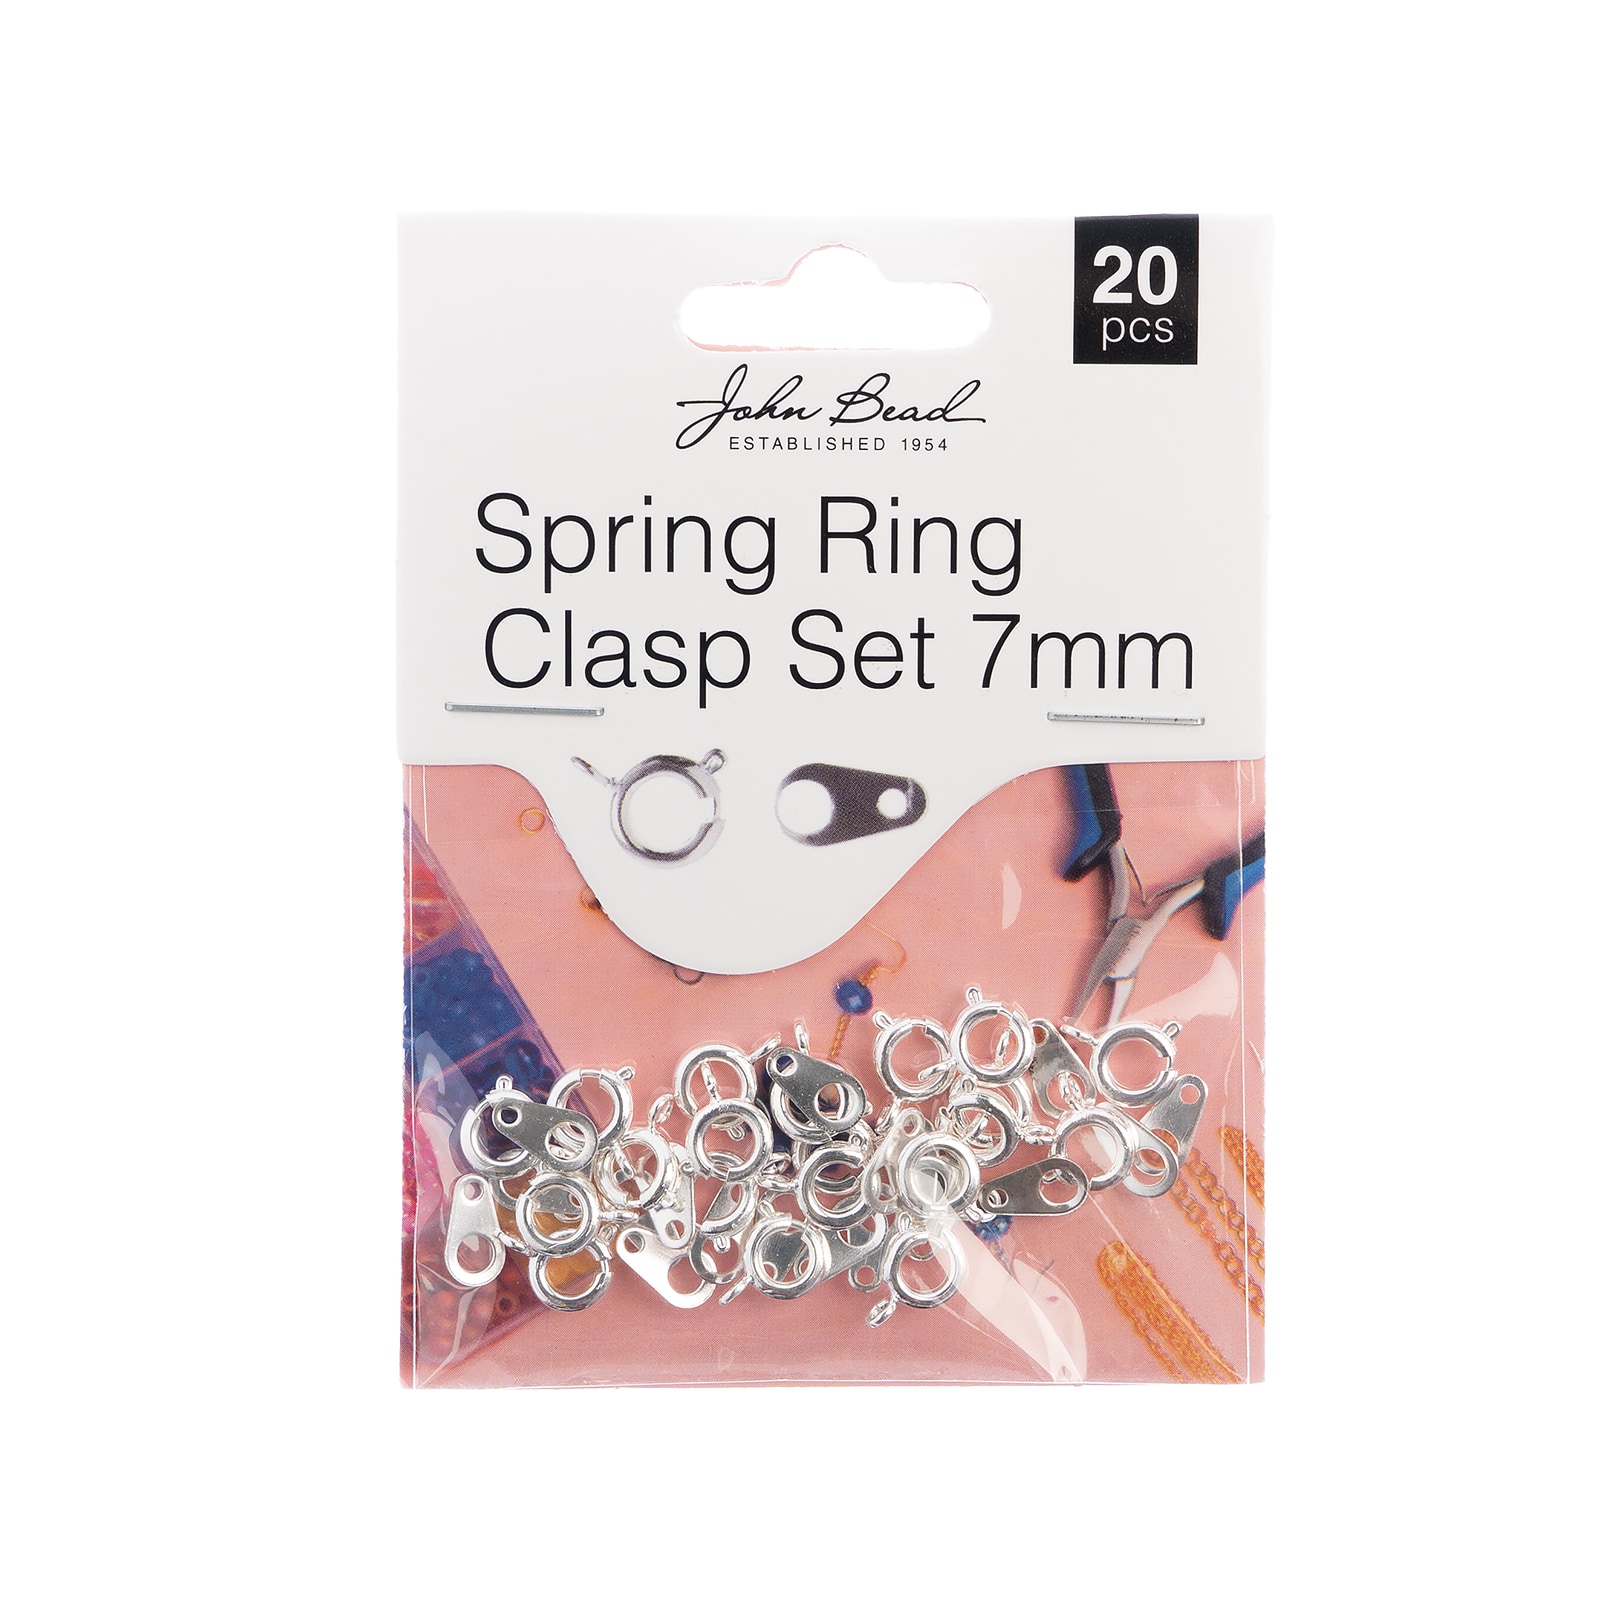 John Bead Must Have Findings 7mm Spring Ring Set, 20ct.